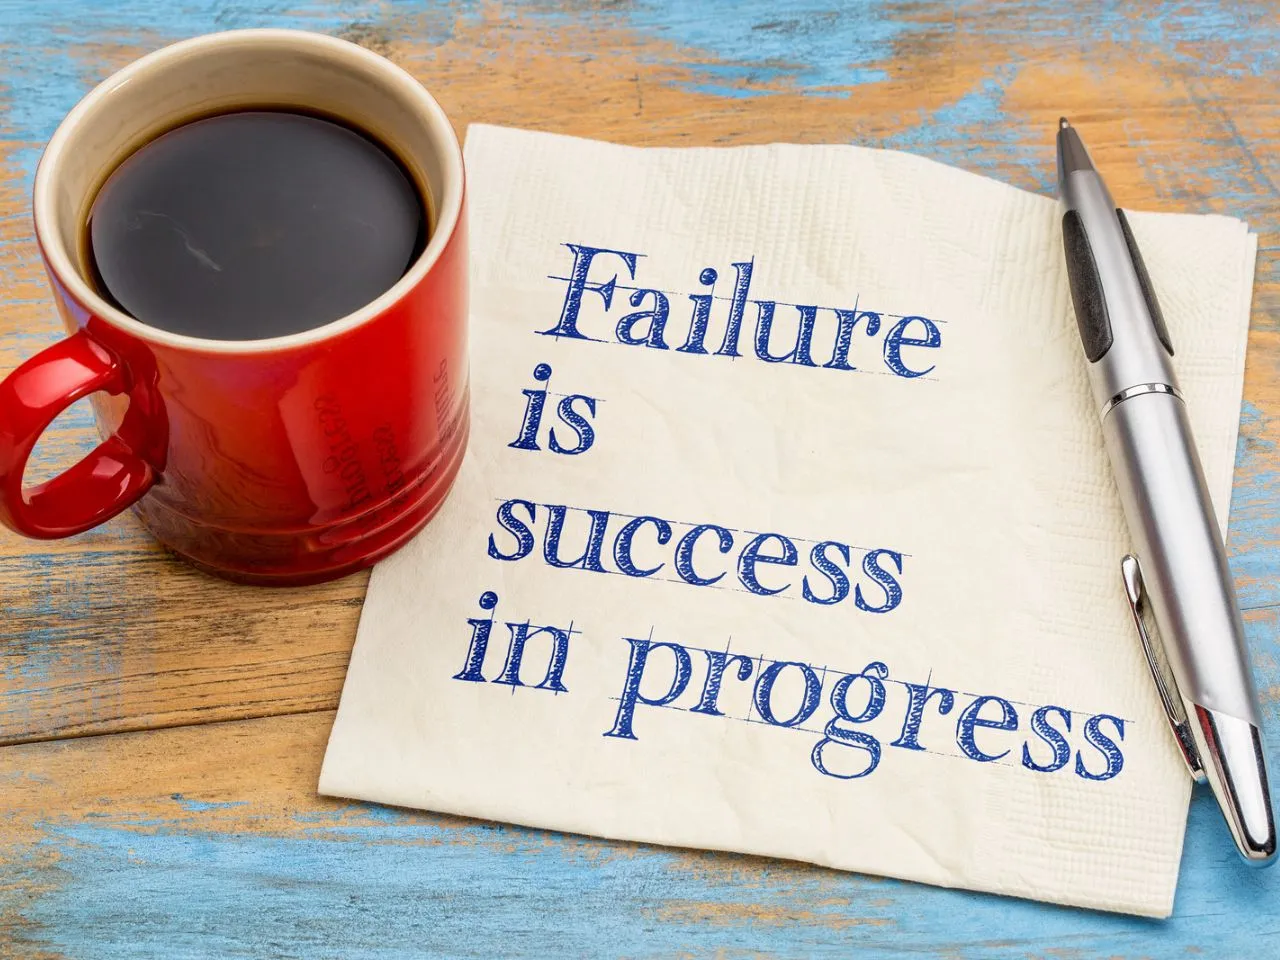 How Should Startup Leaders Analyze Failures Effectively To Acheive Success?